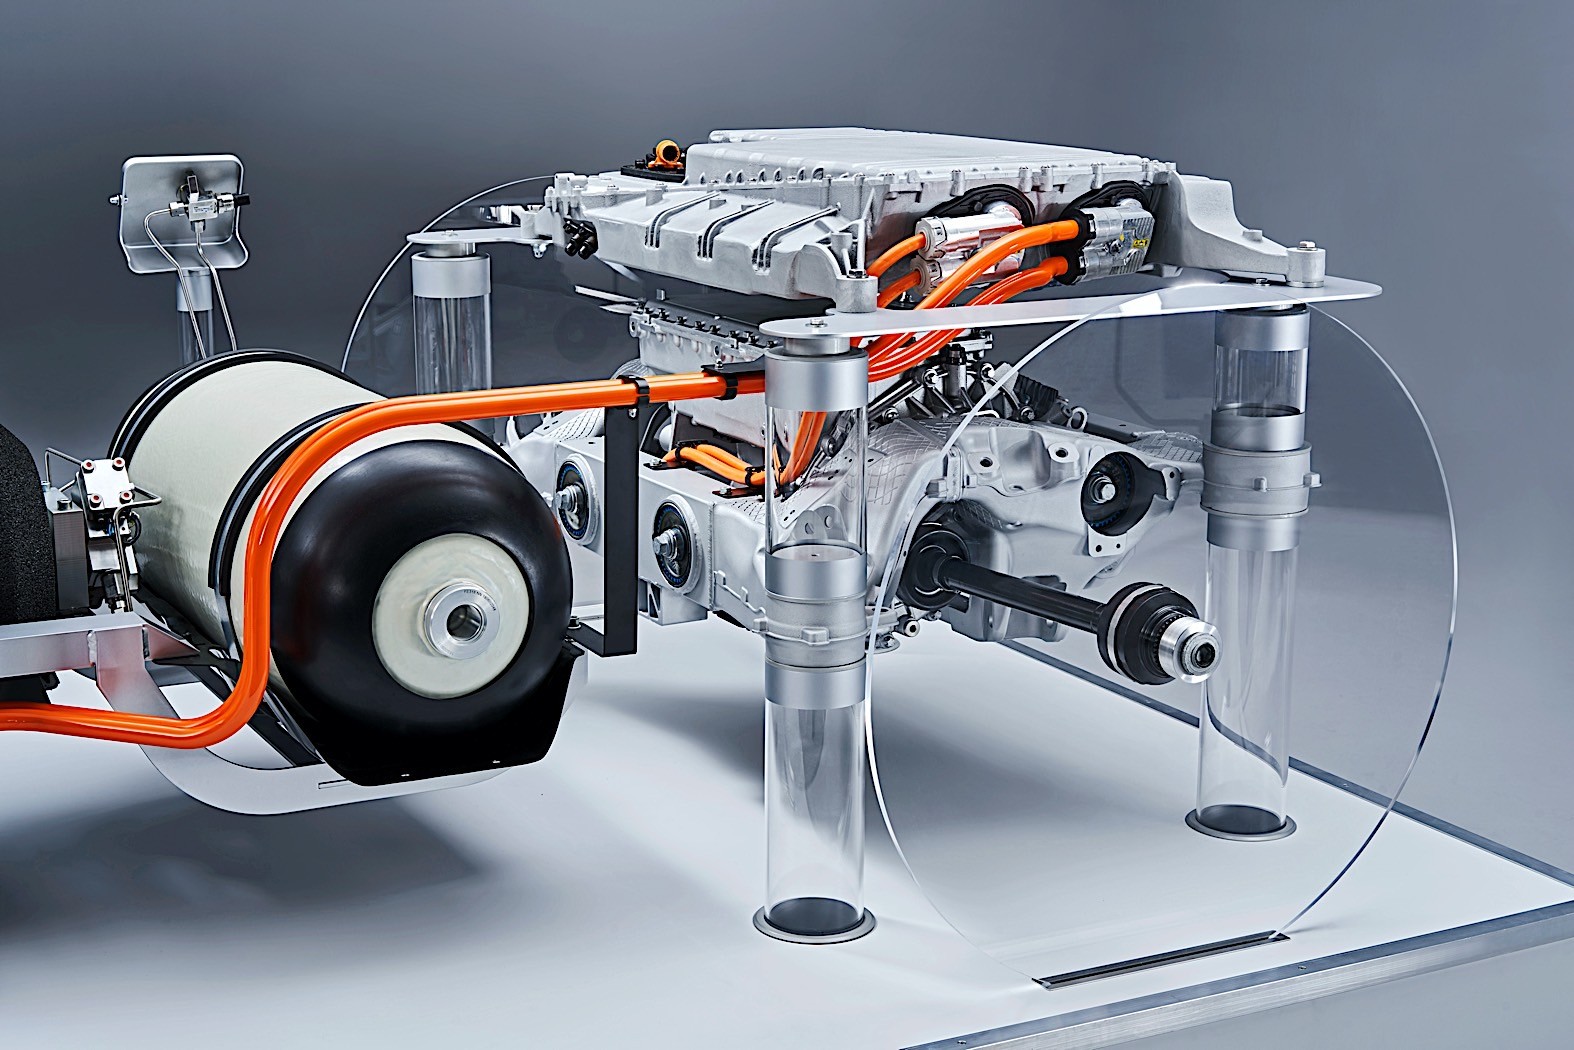 Here's the First Look at BMW's Hydrogen Fuel Cell Powertrain